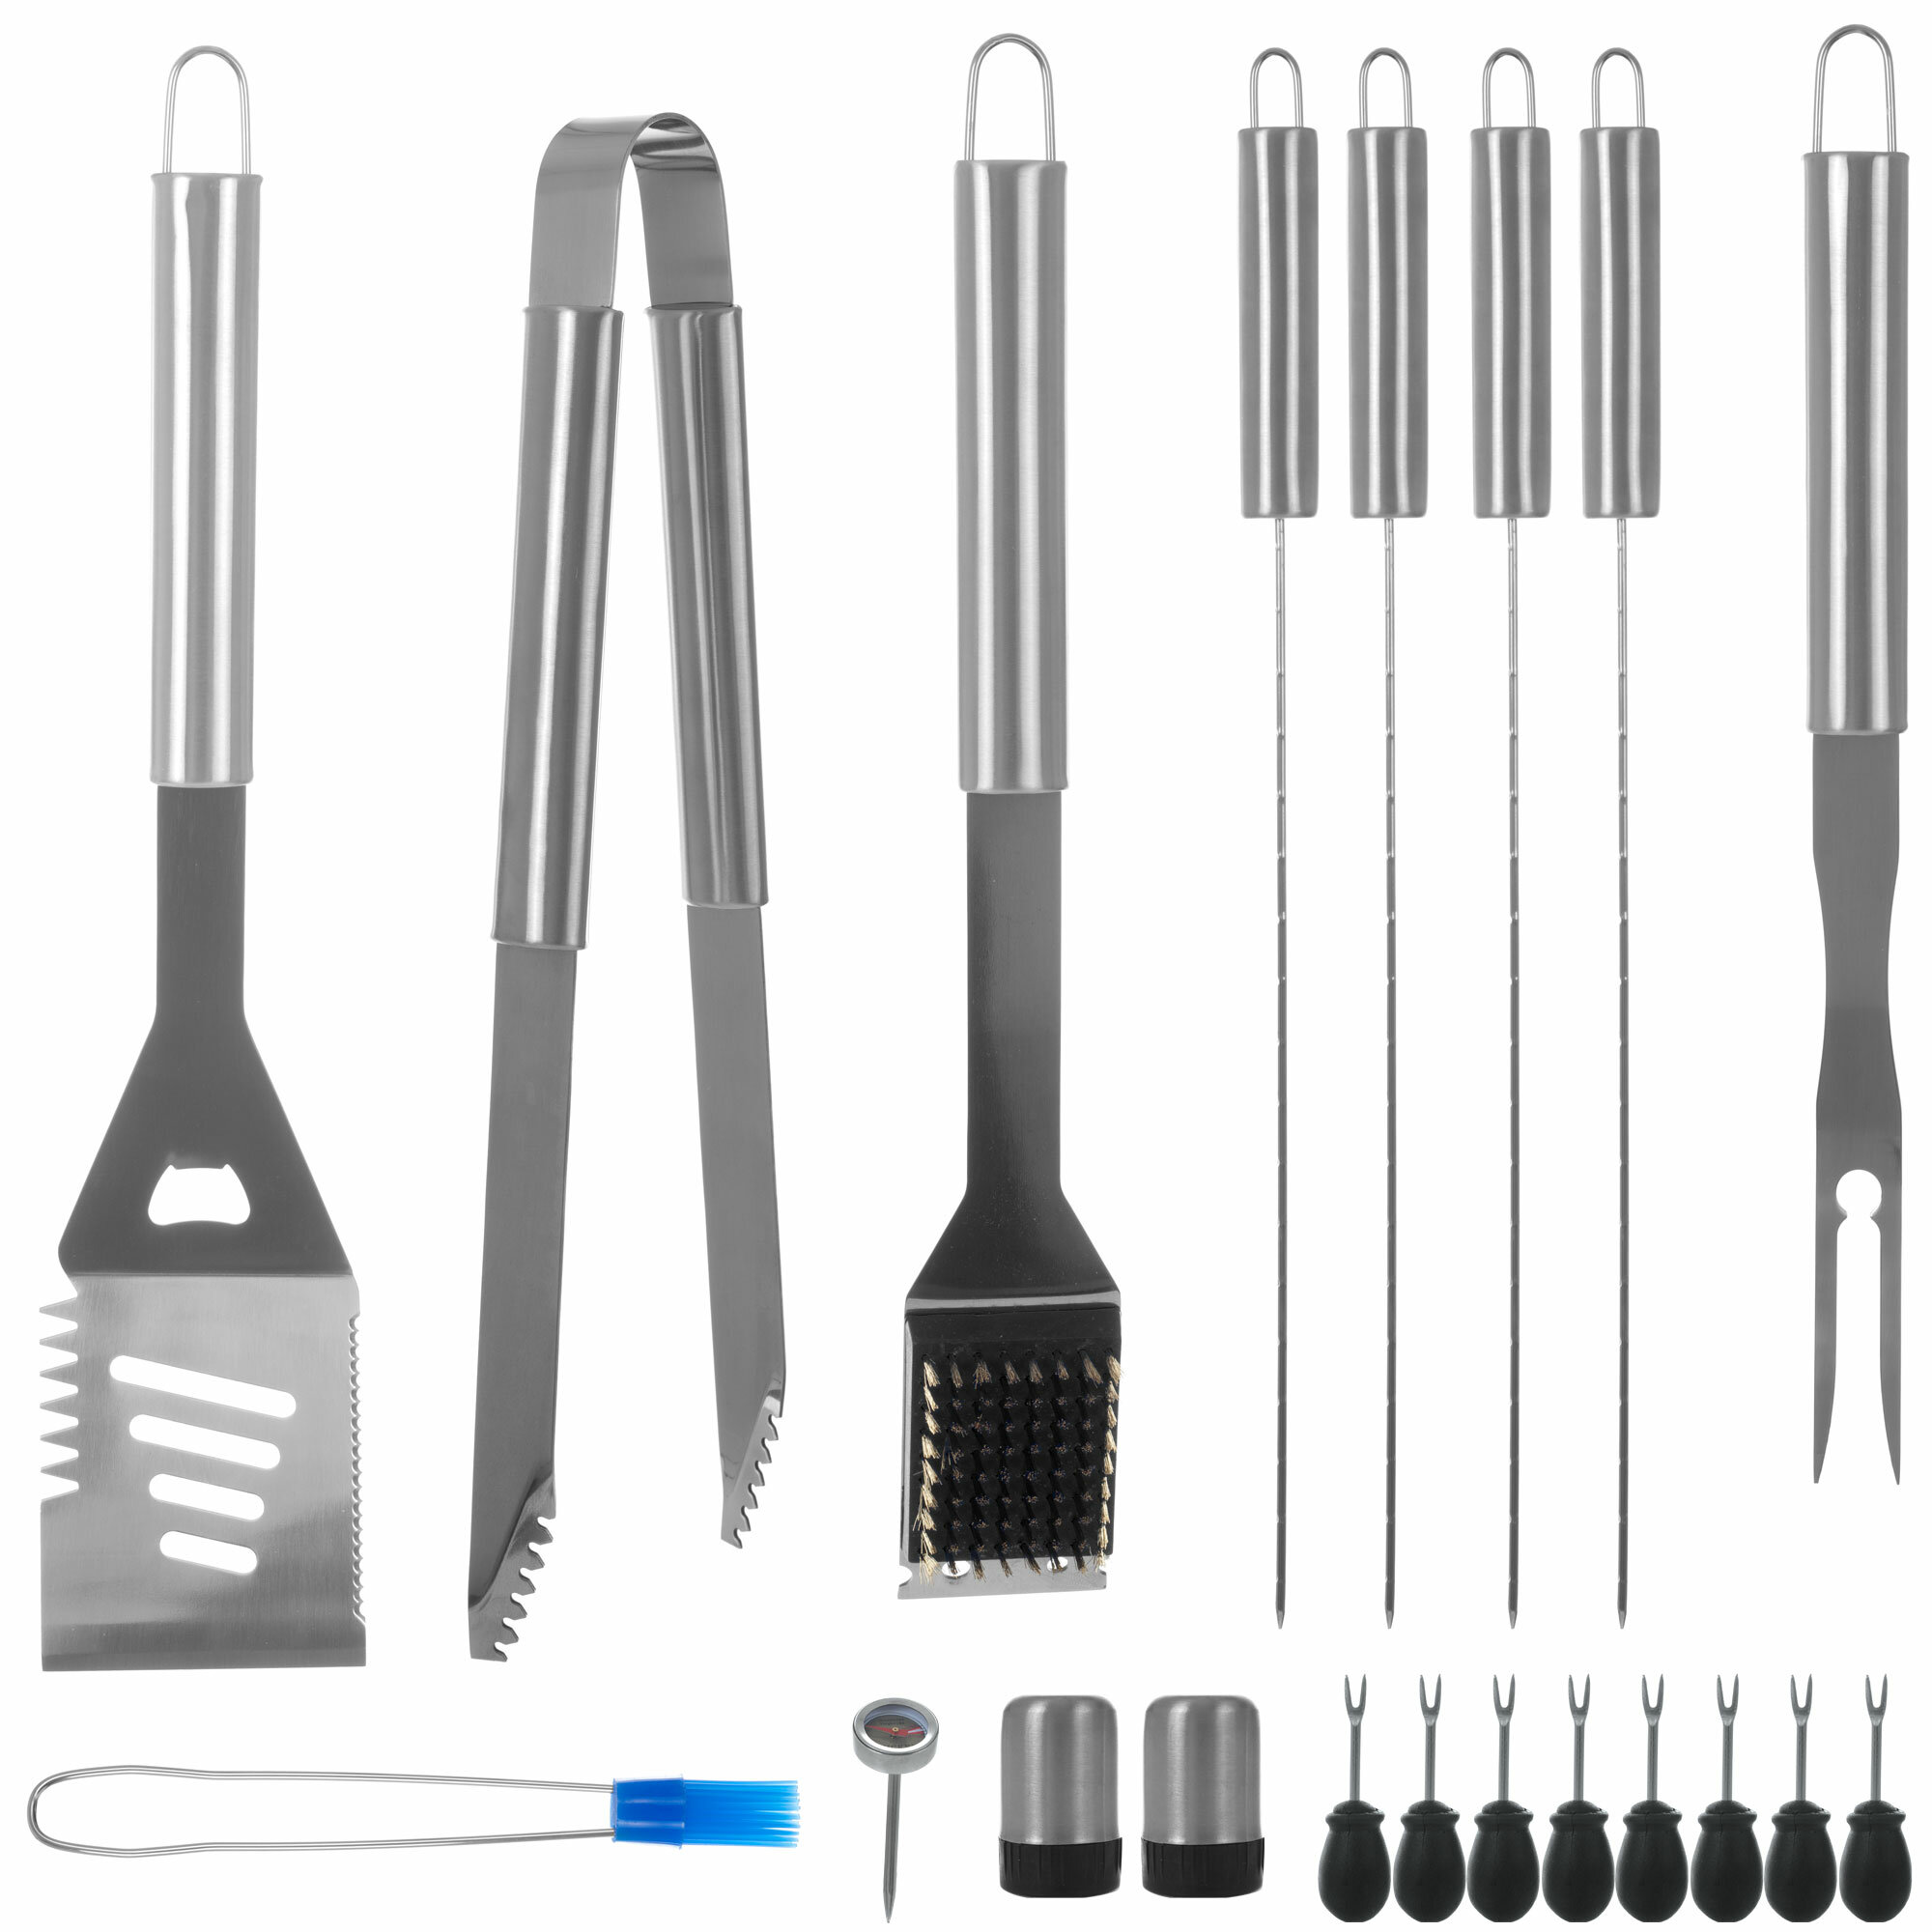 Extra Thick Stainless Steel Airsnigi 20pc Barbecue BBQ Grilling Tools Set 